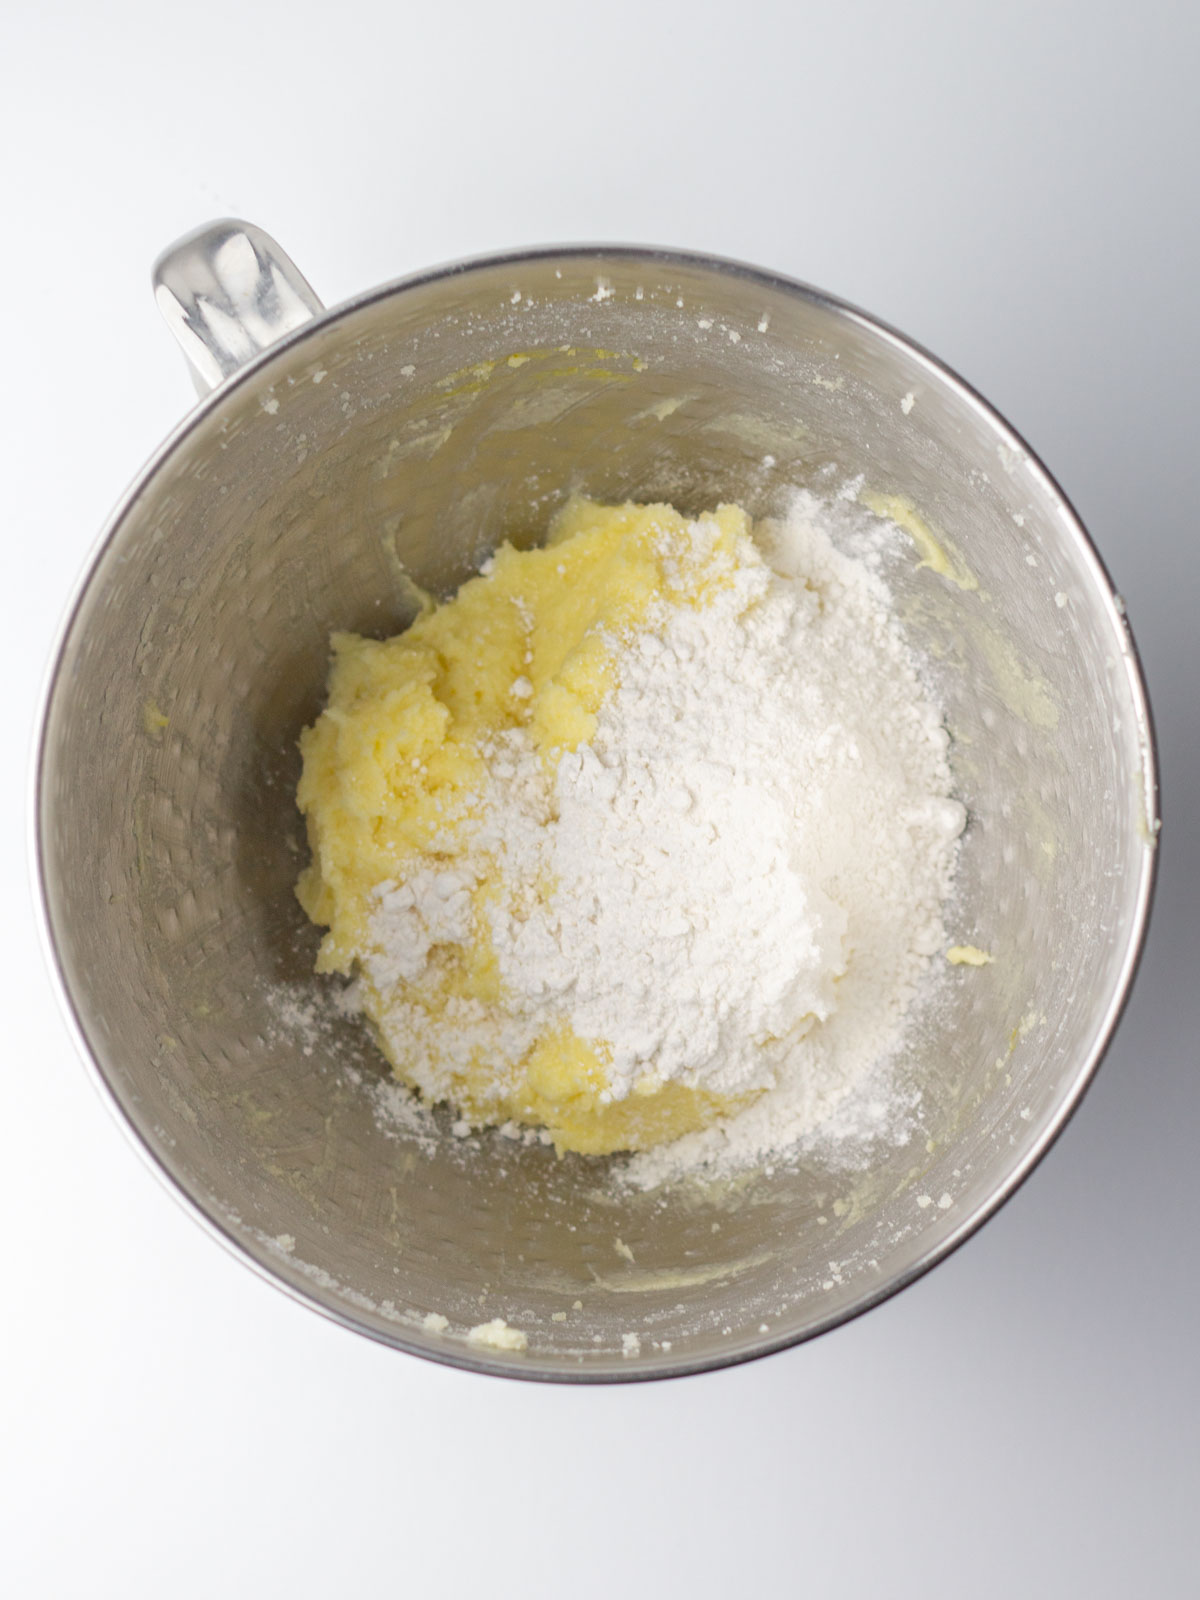 Flour mixture added to the batter in a silver mixing bowl.